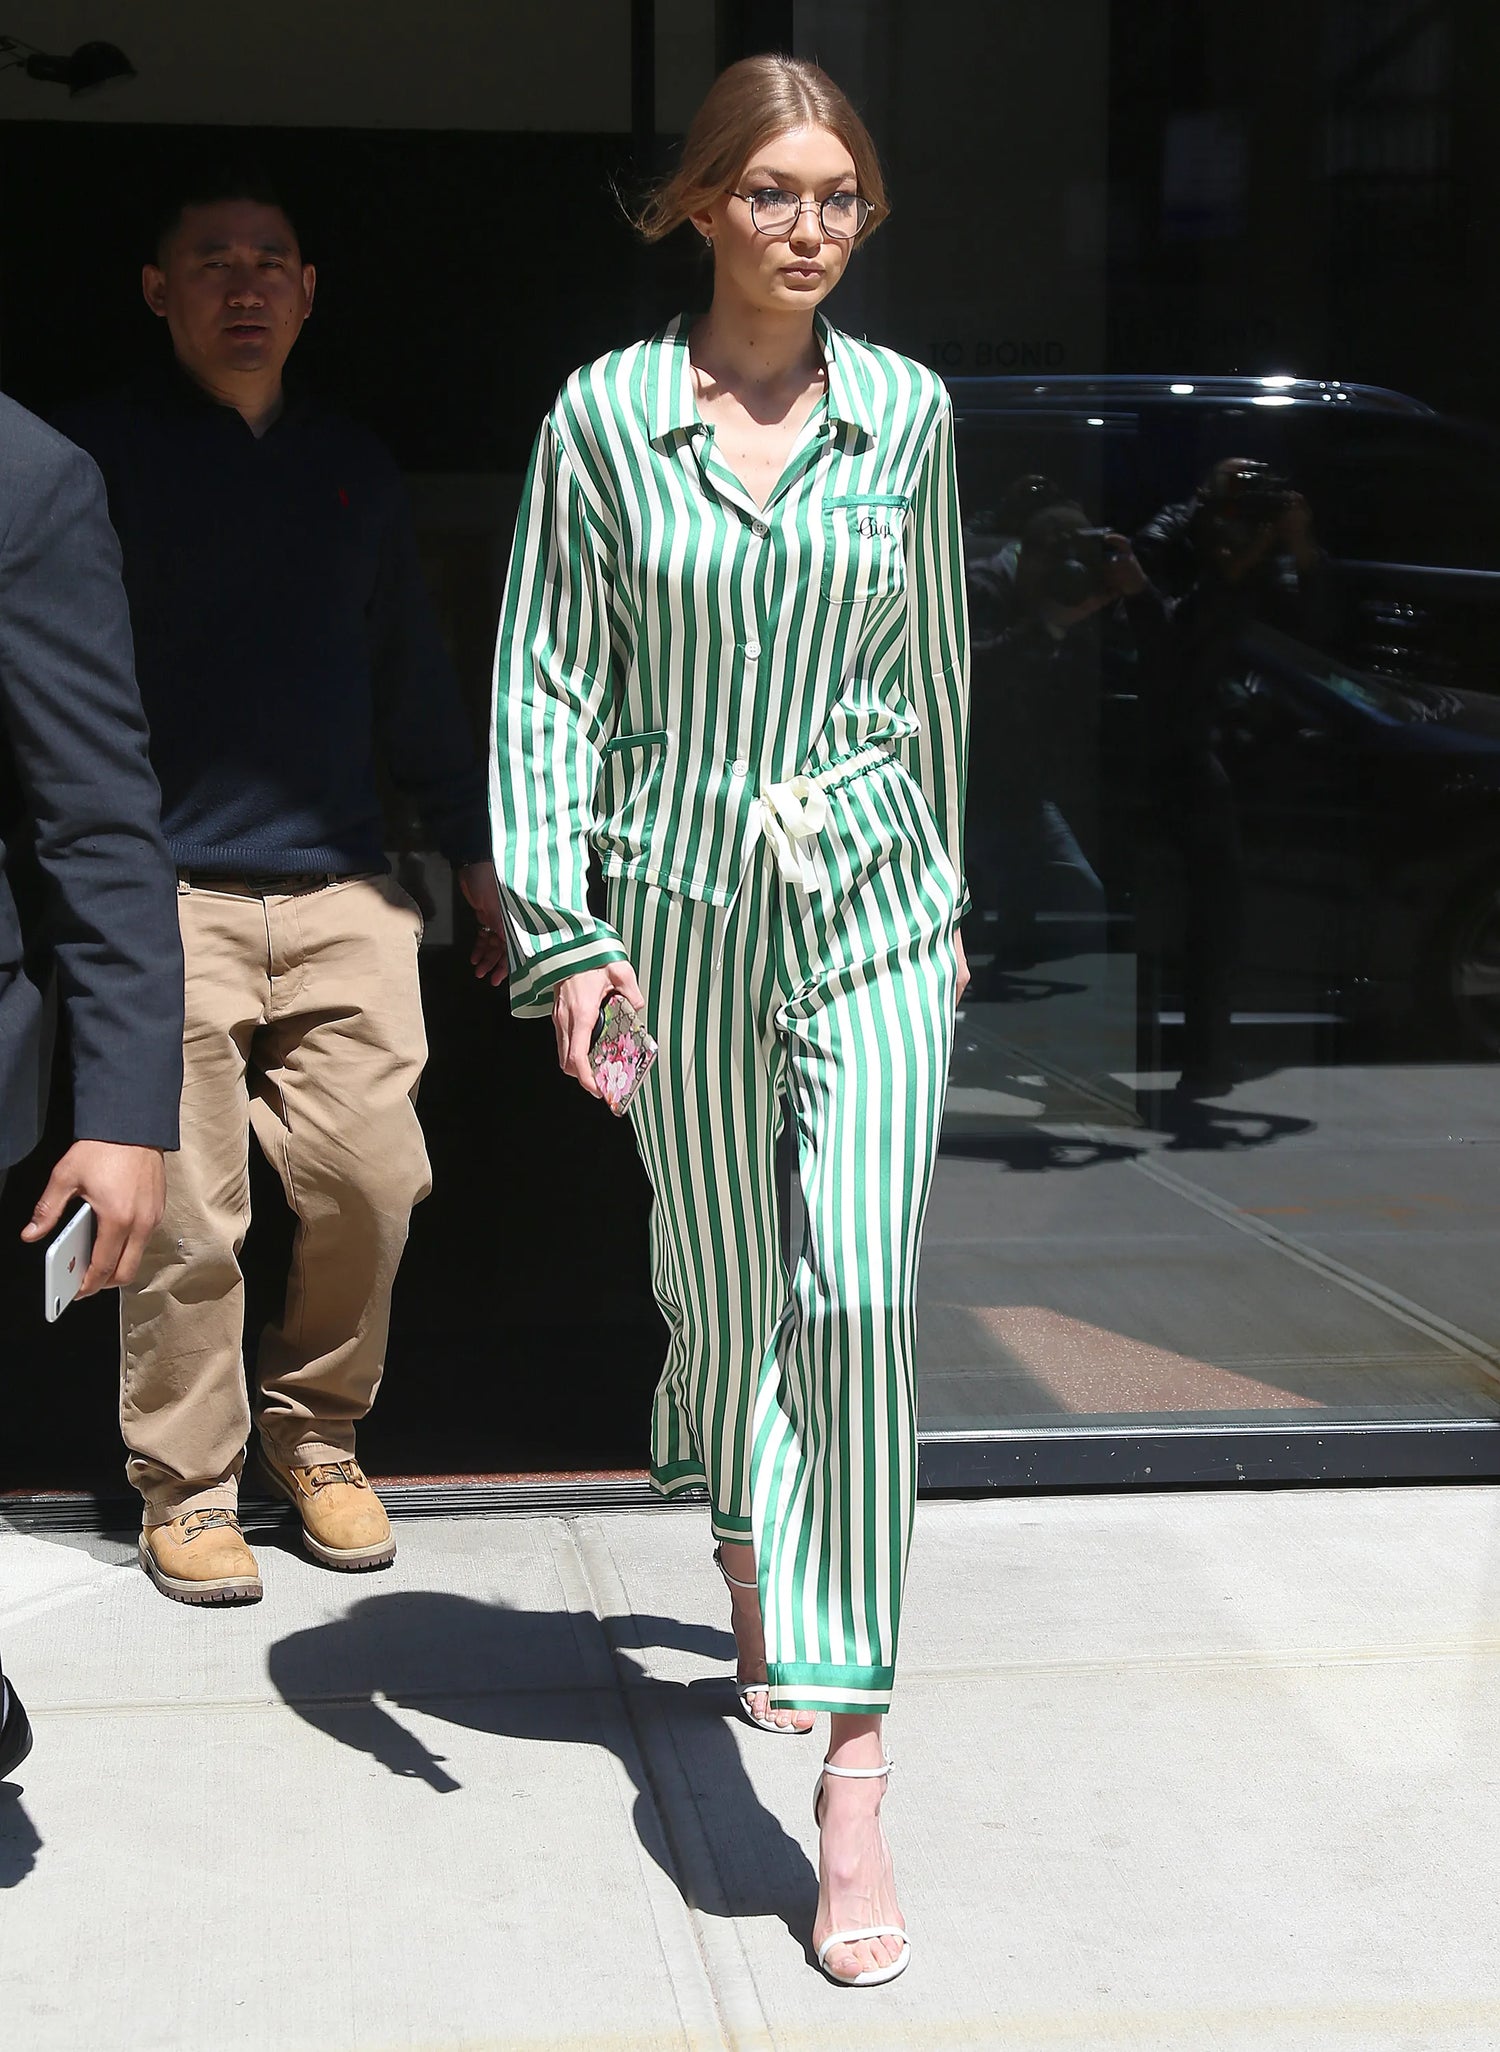 Gigi Hadid in Silk Pajamas in Relaxed Style